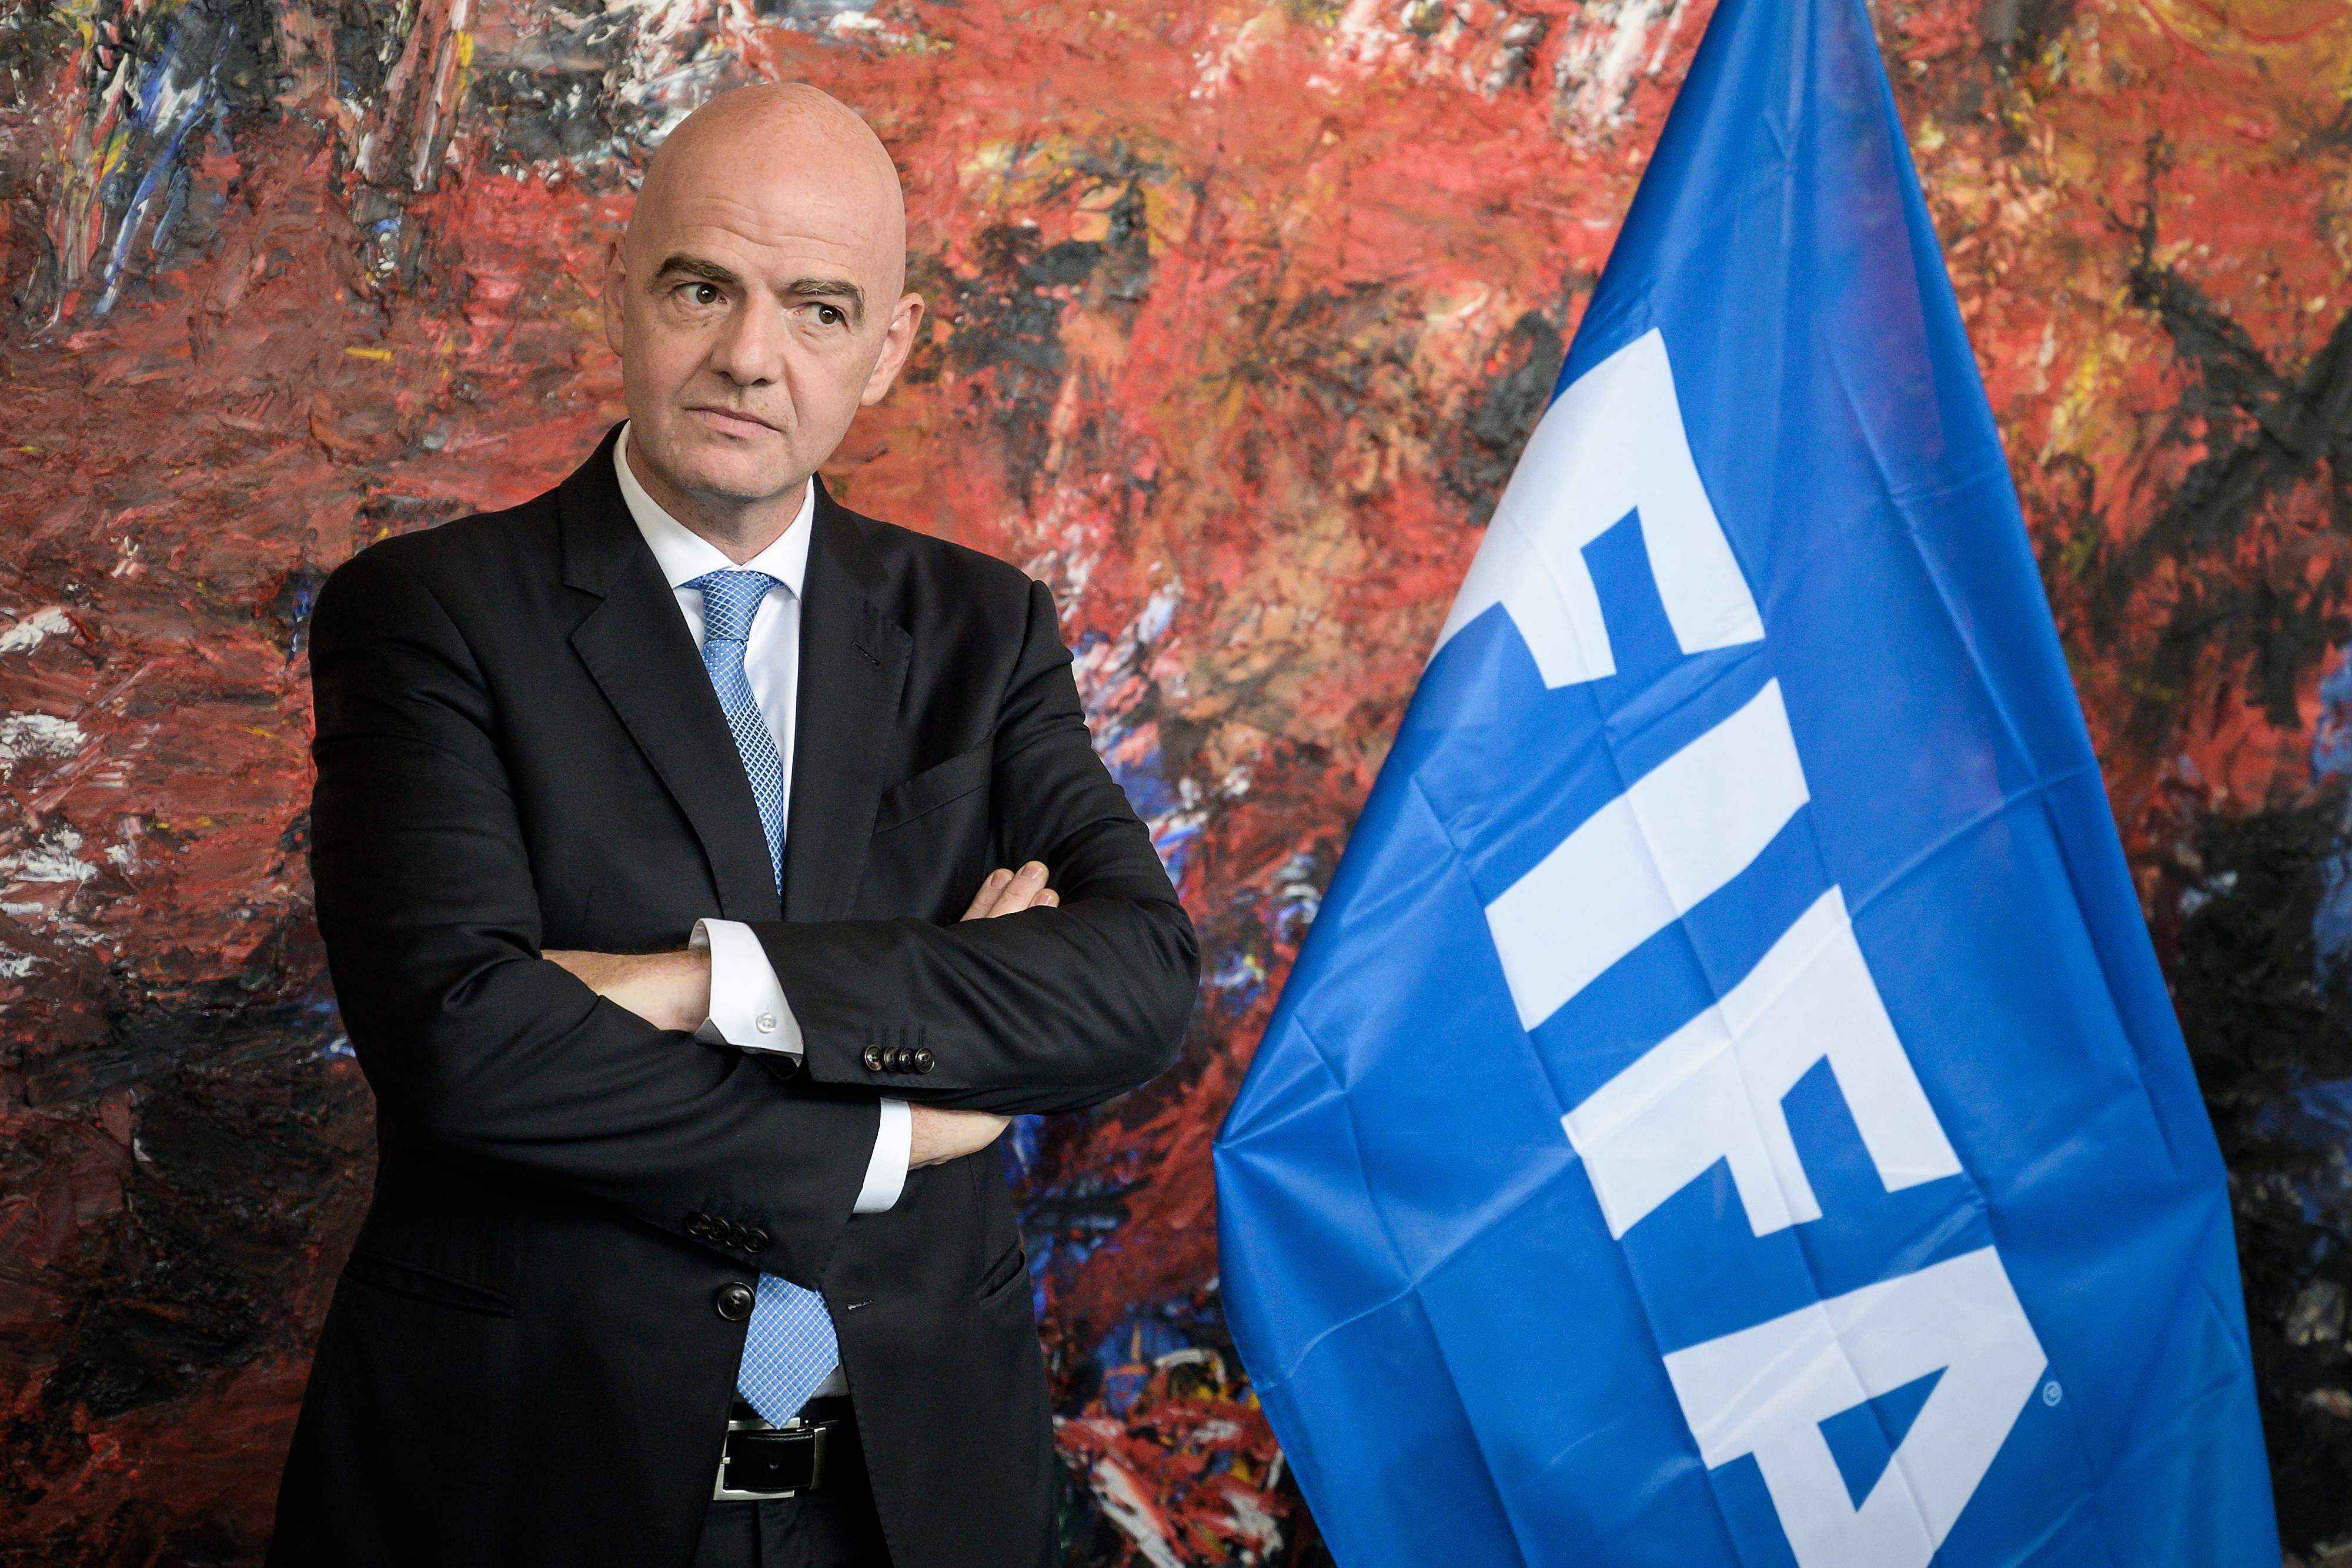 FIFA president Gianni Infantino is suspected to have met a Swiss prosecutor investigating corruption in football to drop an investigation, according to a report of Swiss regional daily newspaper La Tribune de Geneve. (AFP photo)